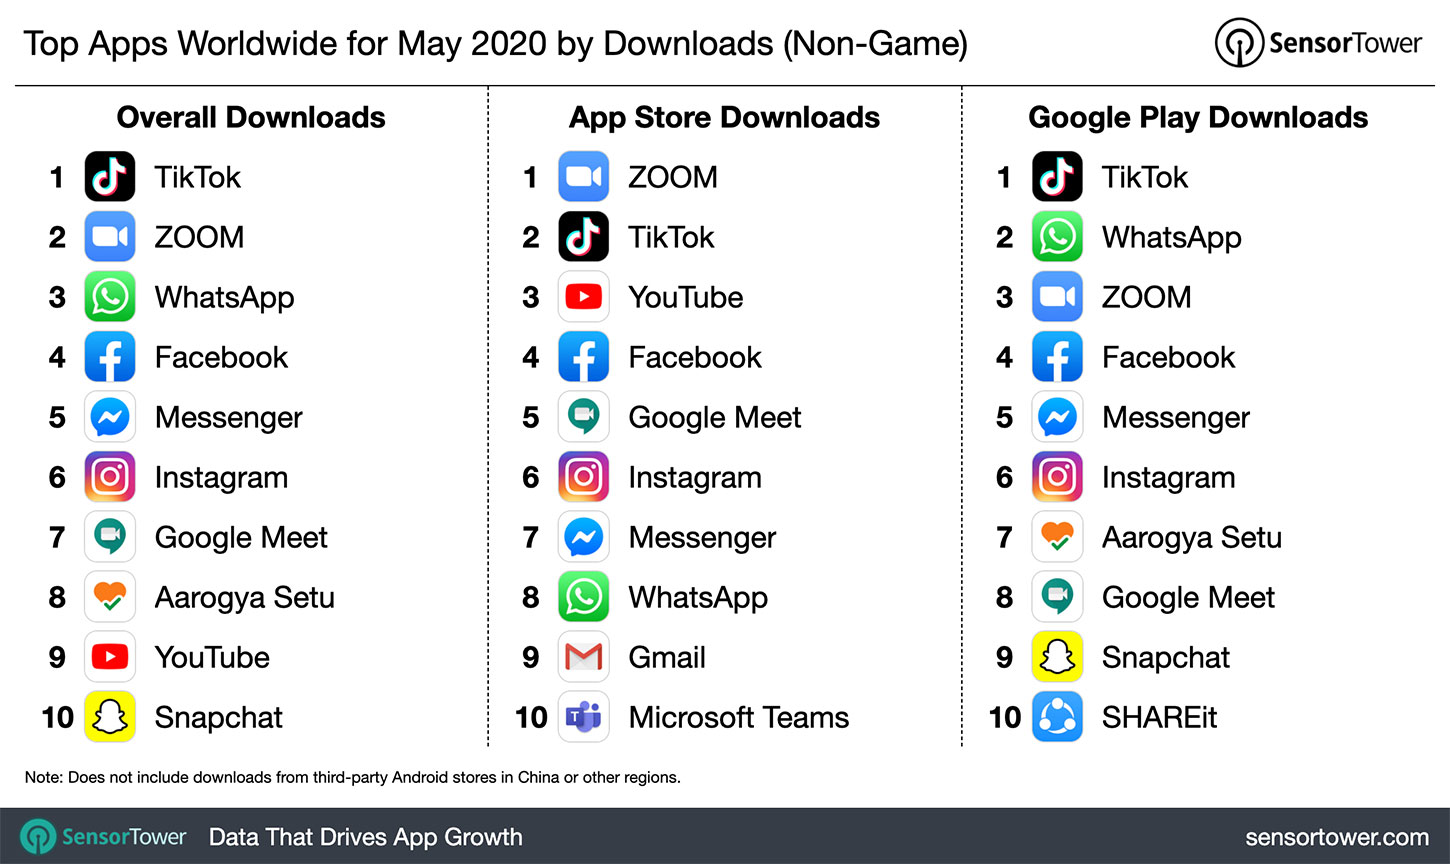 Top Apps Worldwide for May 2020 by Downloads